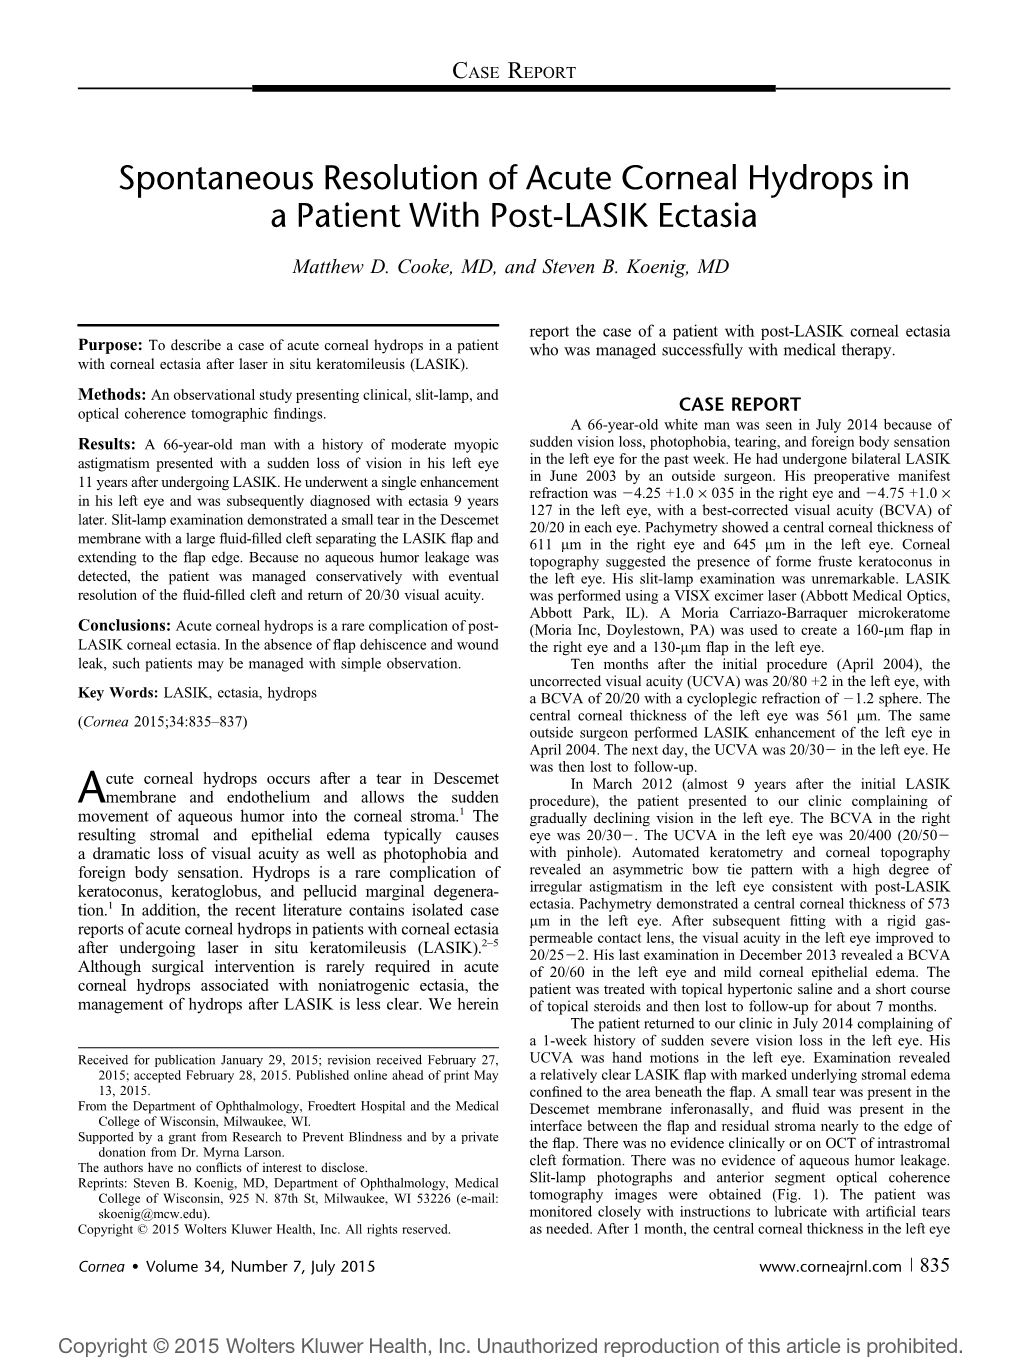 Spontaneous Resolution of Acute Corneal Hydrops in a Patient with Post-LASIK Ectasia